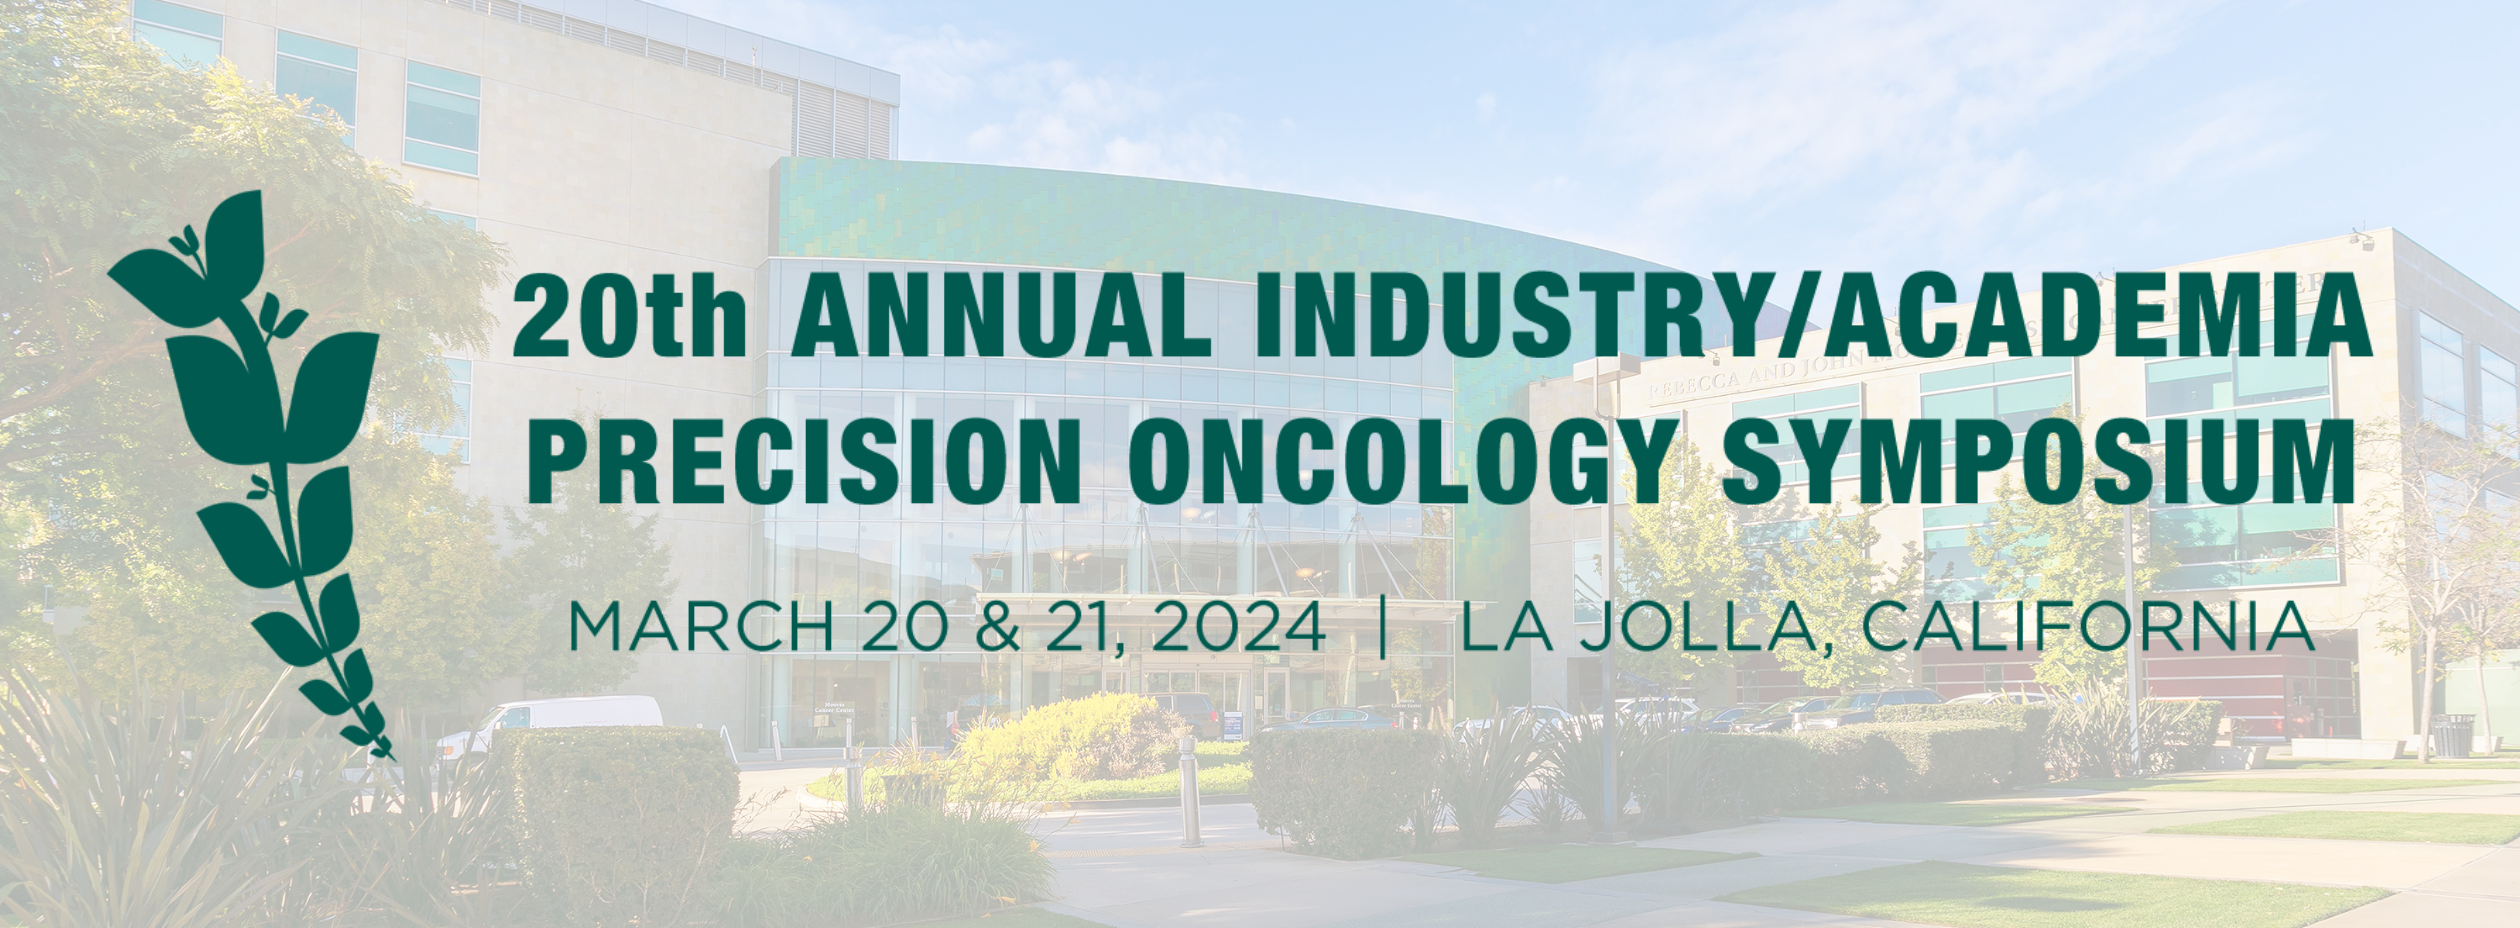 Moores Cancer Center with overlay of "20th Annual Industry/Academia Symposium"